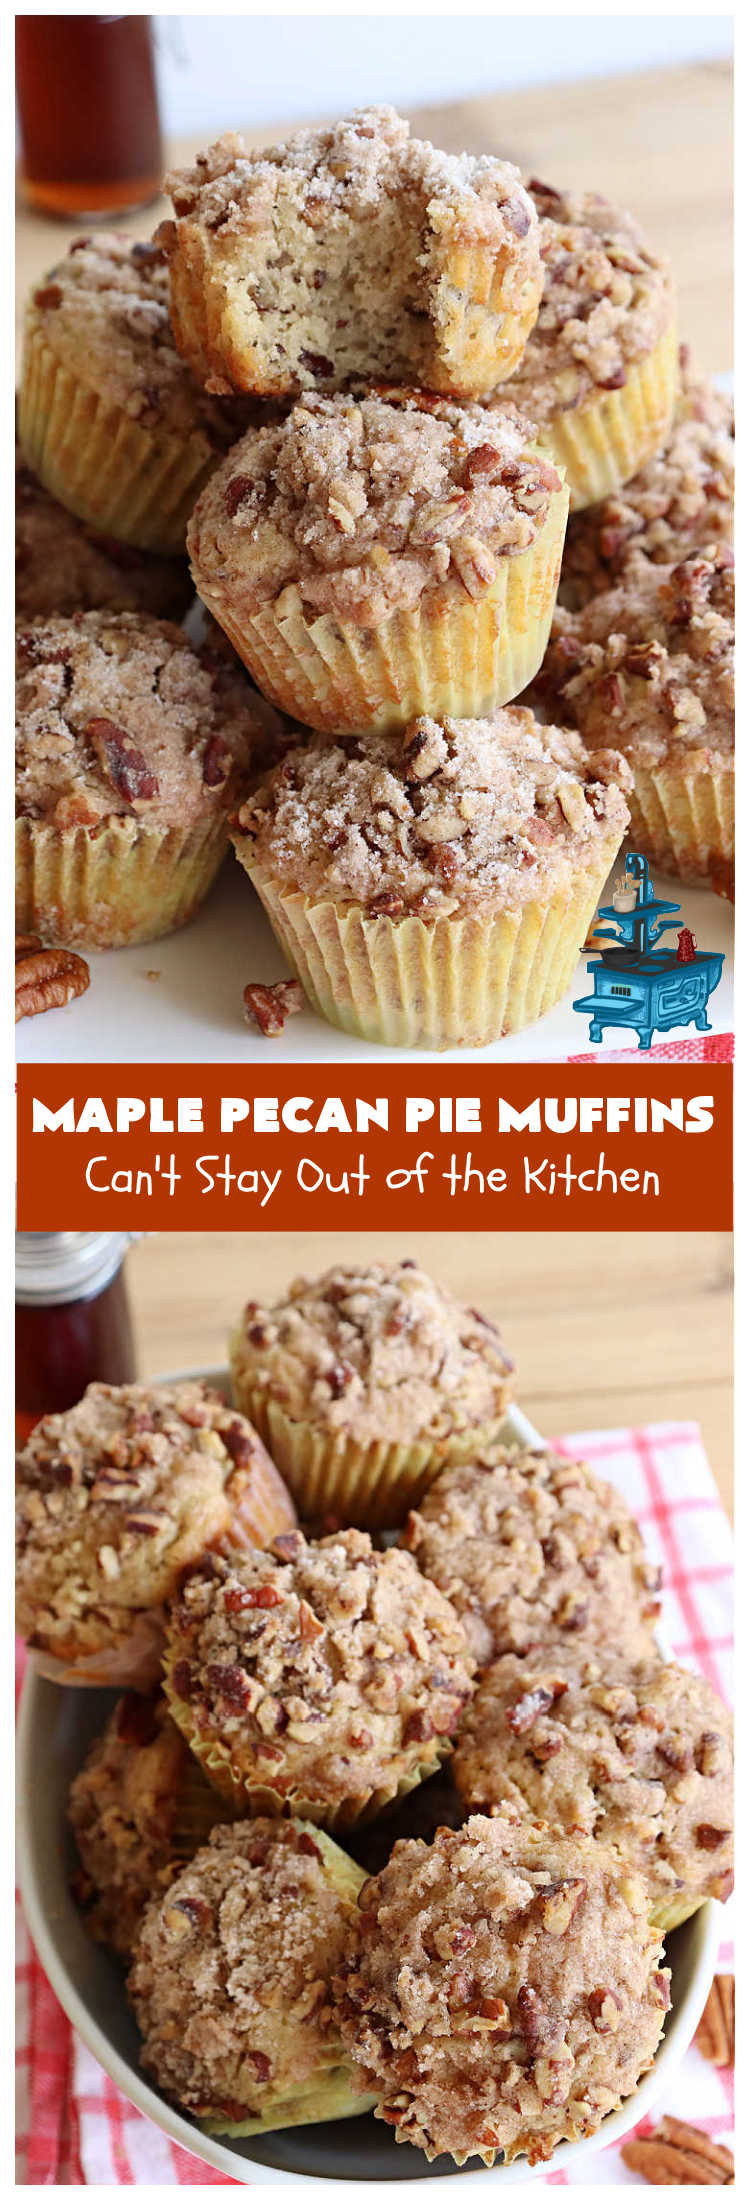 Maple Pecan Pie Muffins | Can't Stay Out of the Kitchen | #Maple flavor just pops in these delicious #PecanPie #muffins. Every bite will have you drooling. If you enjoy sweets with your morning coffee, this is a terrific #recipe to wake up to. Great for a weekend, company or #holiday #breakfast too. #BreakfastMuffins #MaplePecanPieMuffins 